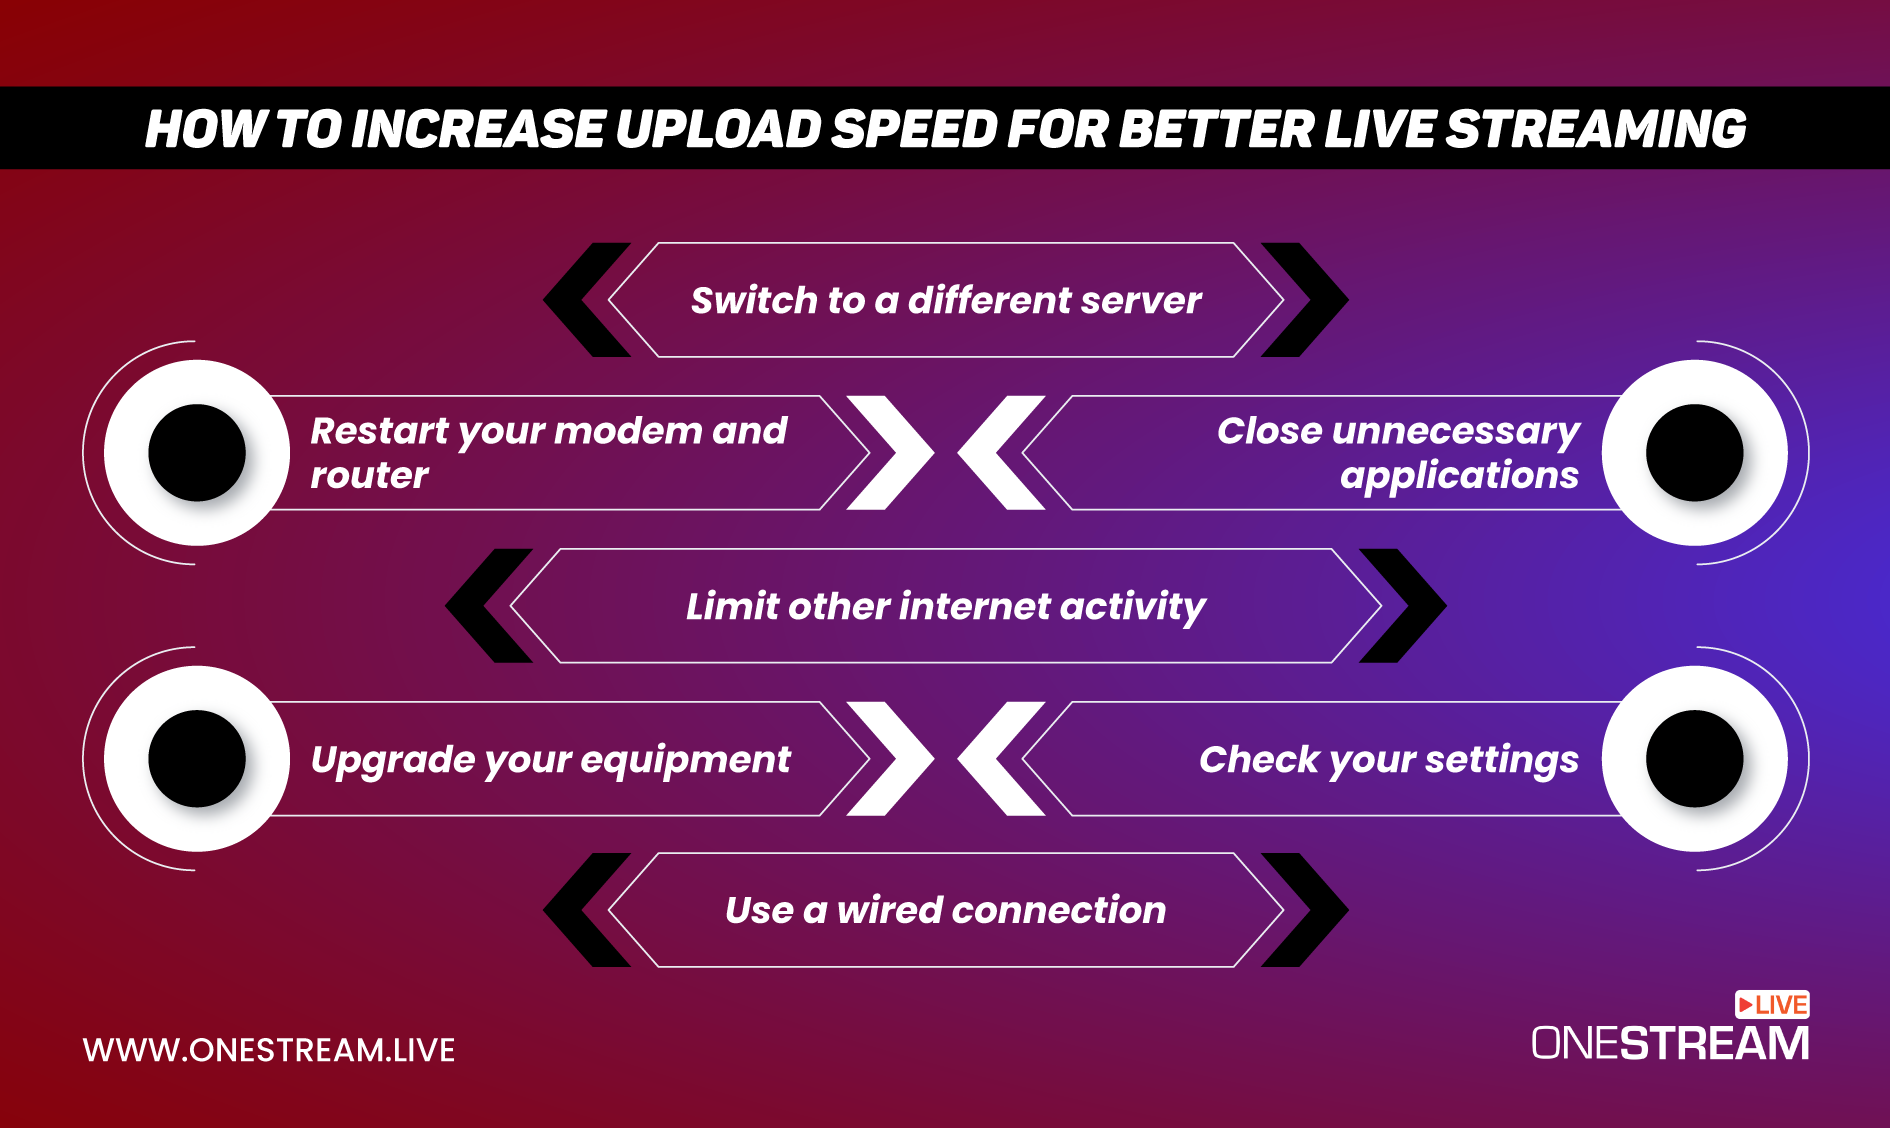 Increase Upload Speed For Better Live Streaming